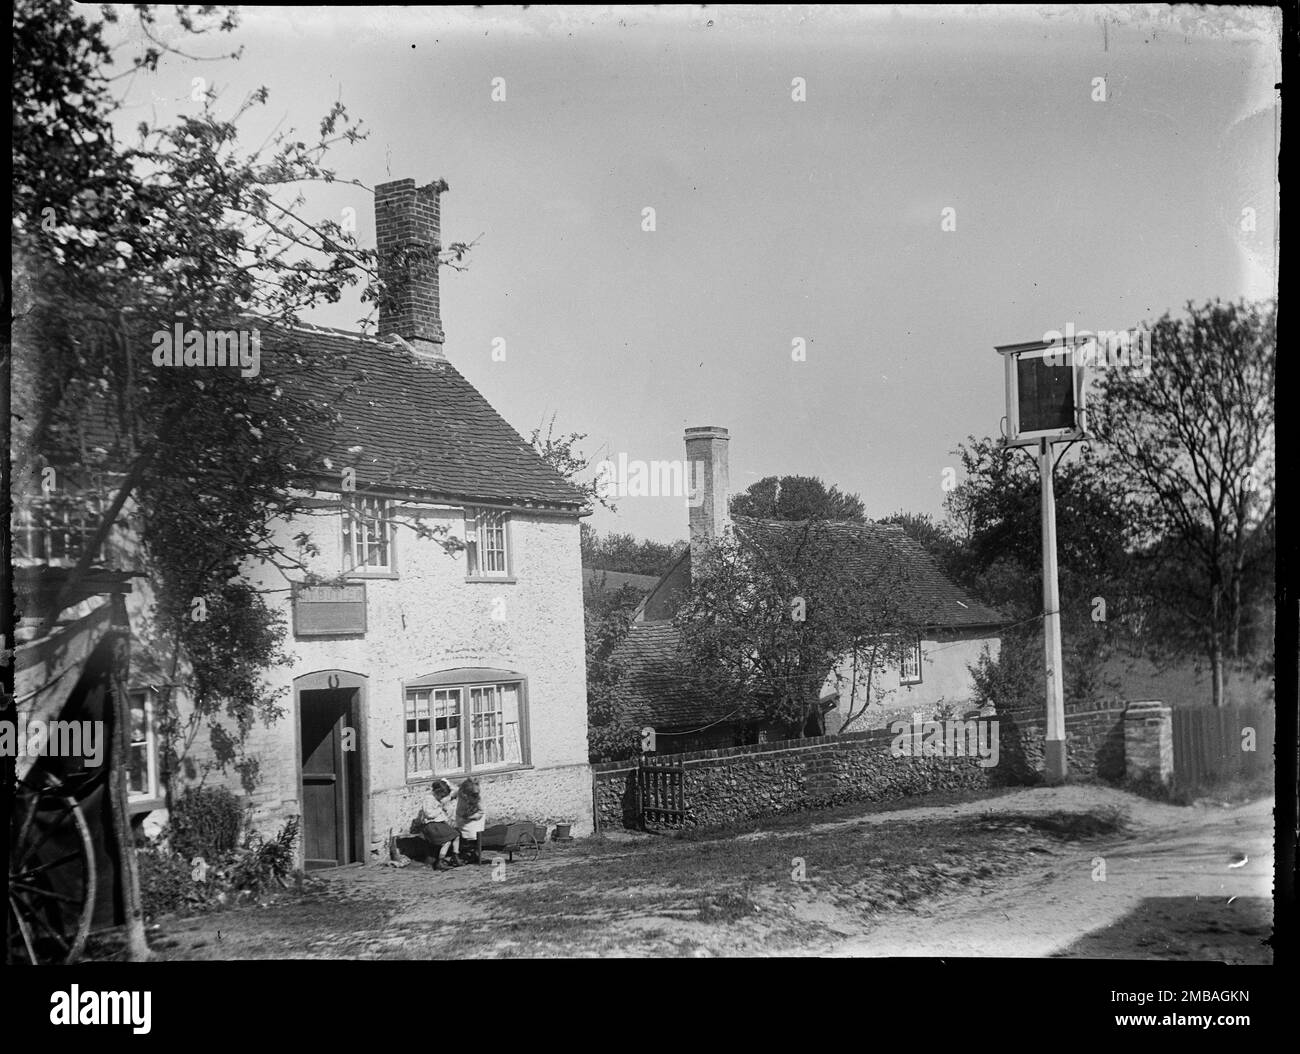 Beacon's Bottom, Stokenchurch, Wycombe, Buckinghamshire, 1919. A beer house and inn sign at Beacon's Bottom with two young girls sitting outside. At the time the photograph was taken Henry Butler was registered as a beer retailer in Beacon's Bottom. His name can just be seen on the sign above the door. Stock Photo